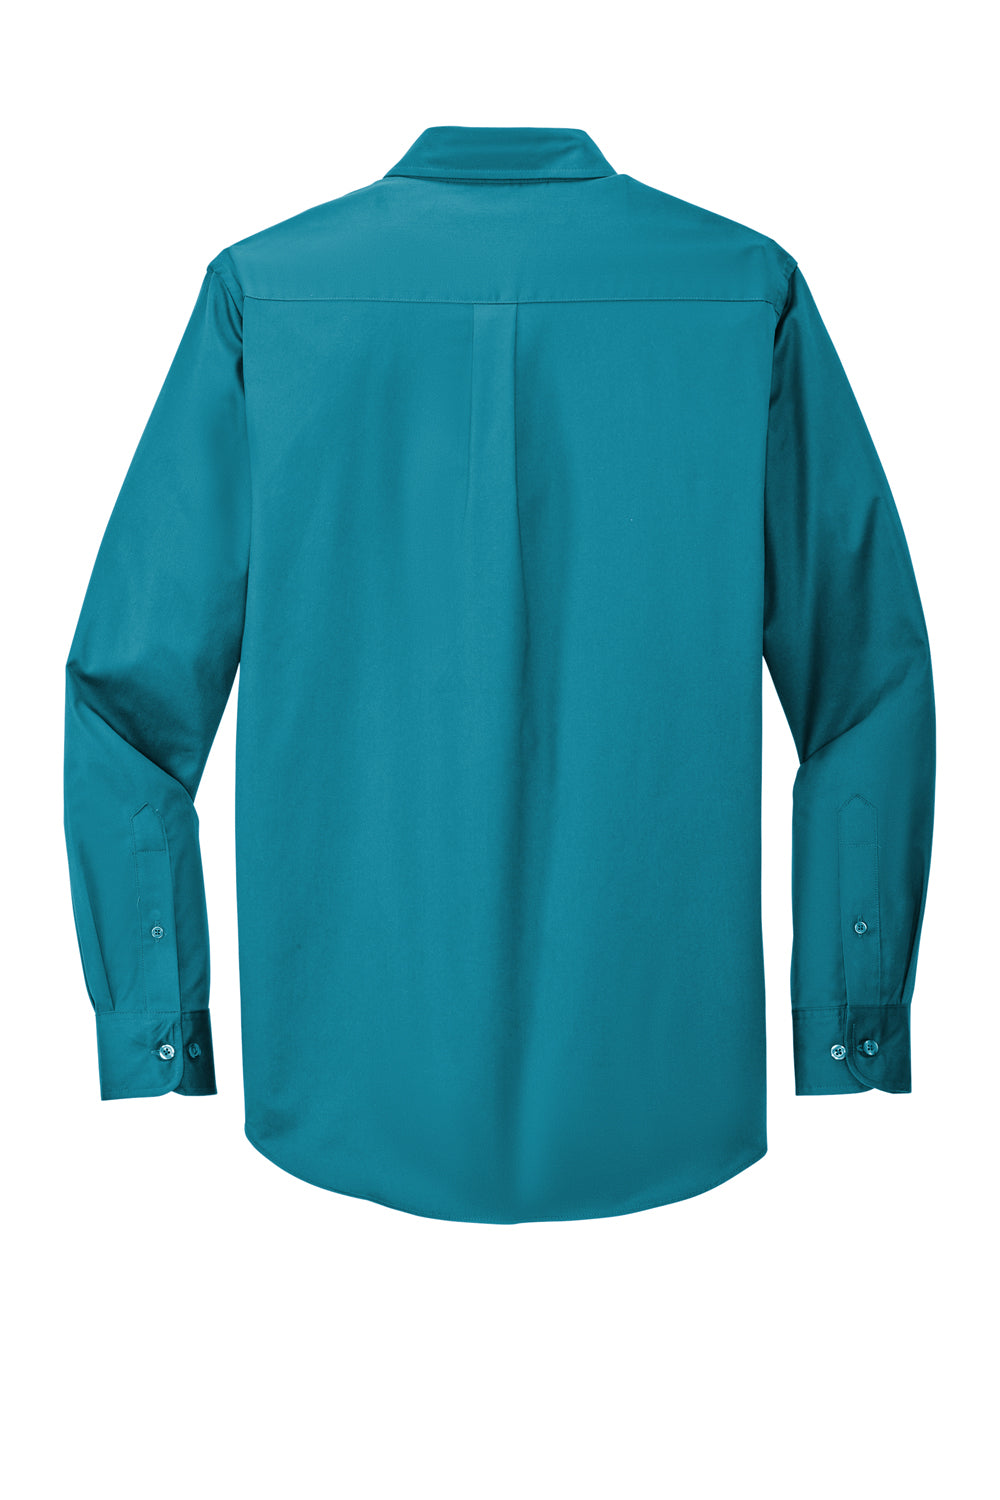 Port Authority S608/TLS608/S608ES Mens Easy Care Wrinkle Resistant Long Sleeve Button Down Shirt w/ Pocket Teal Green Flat Back